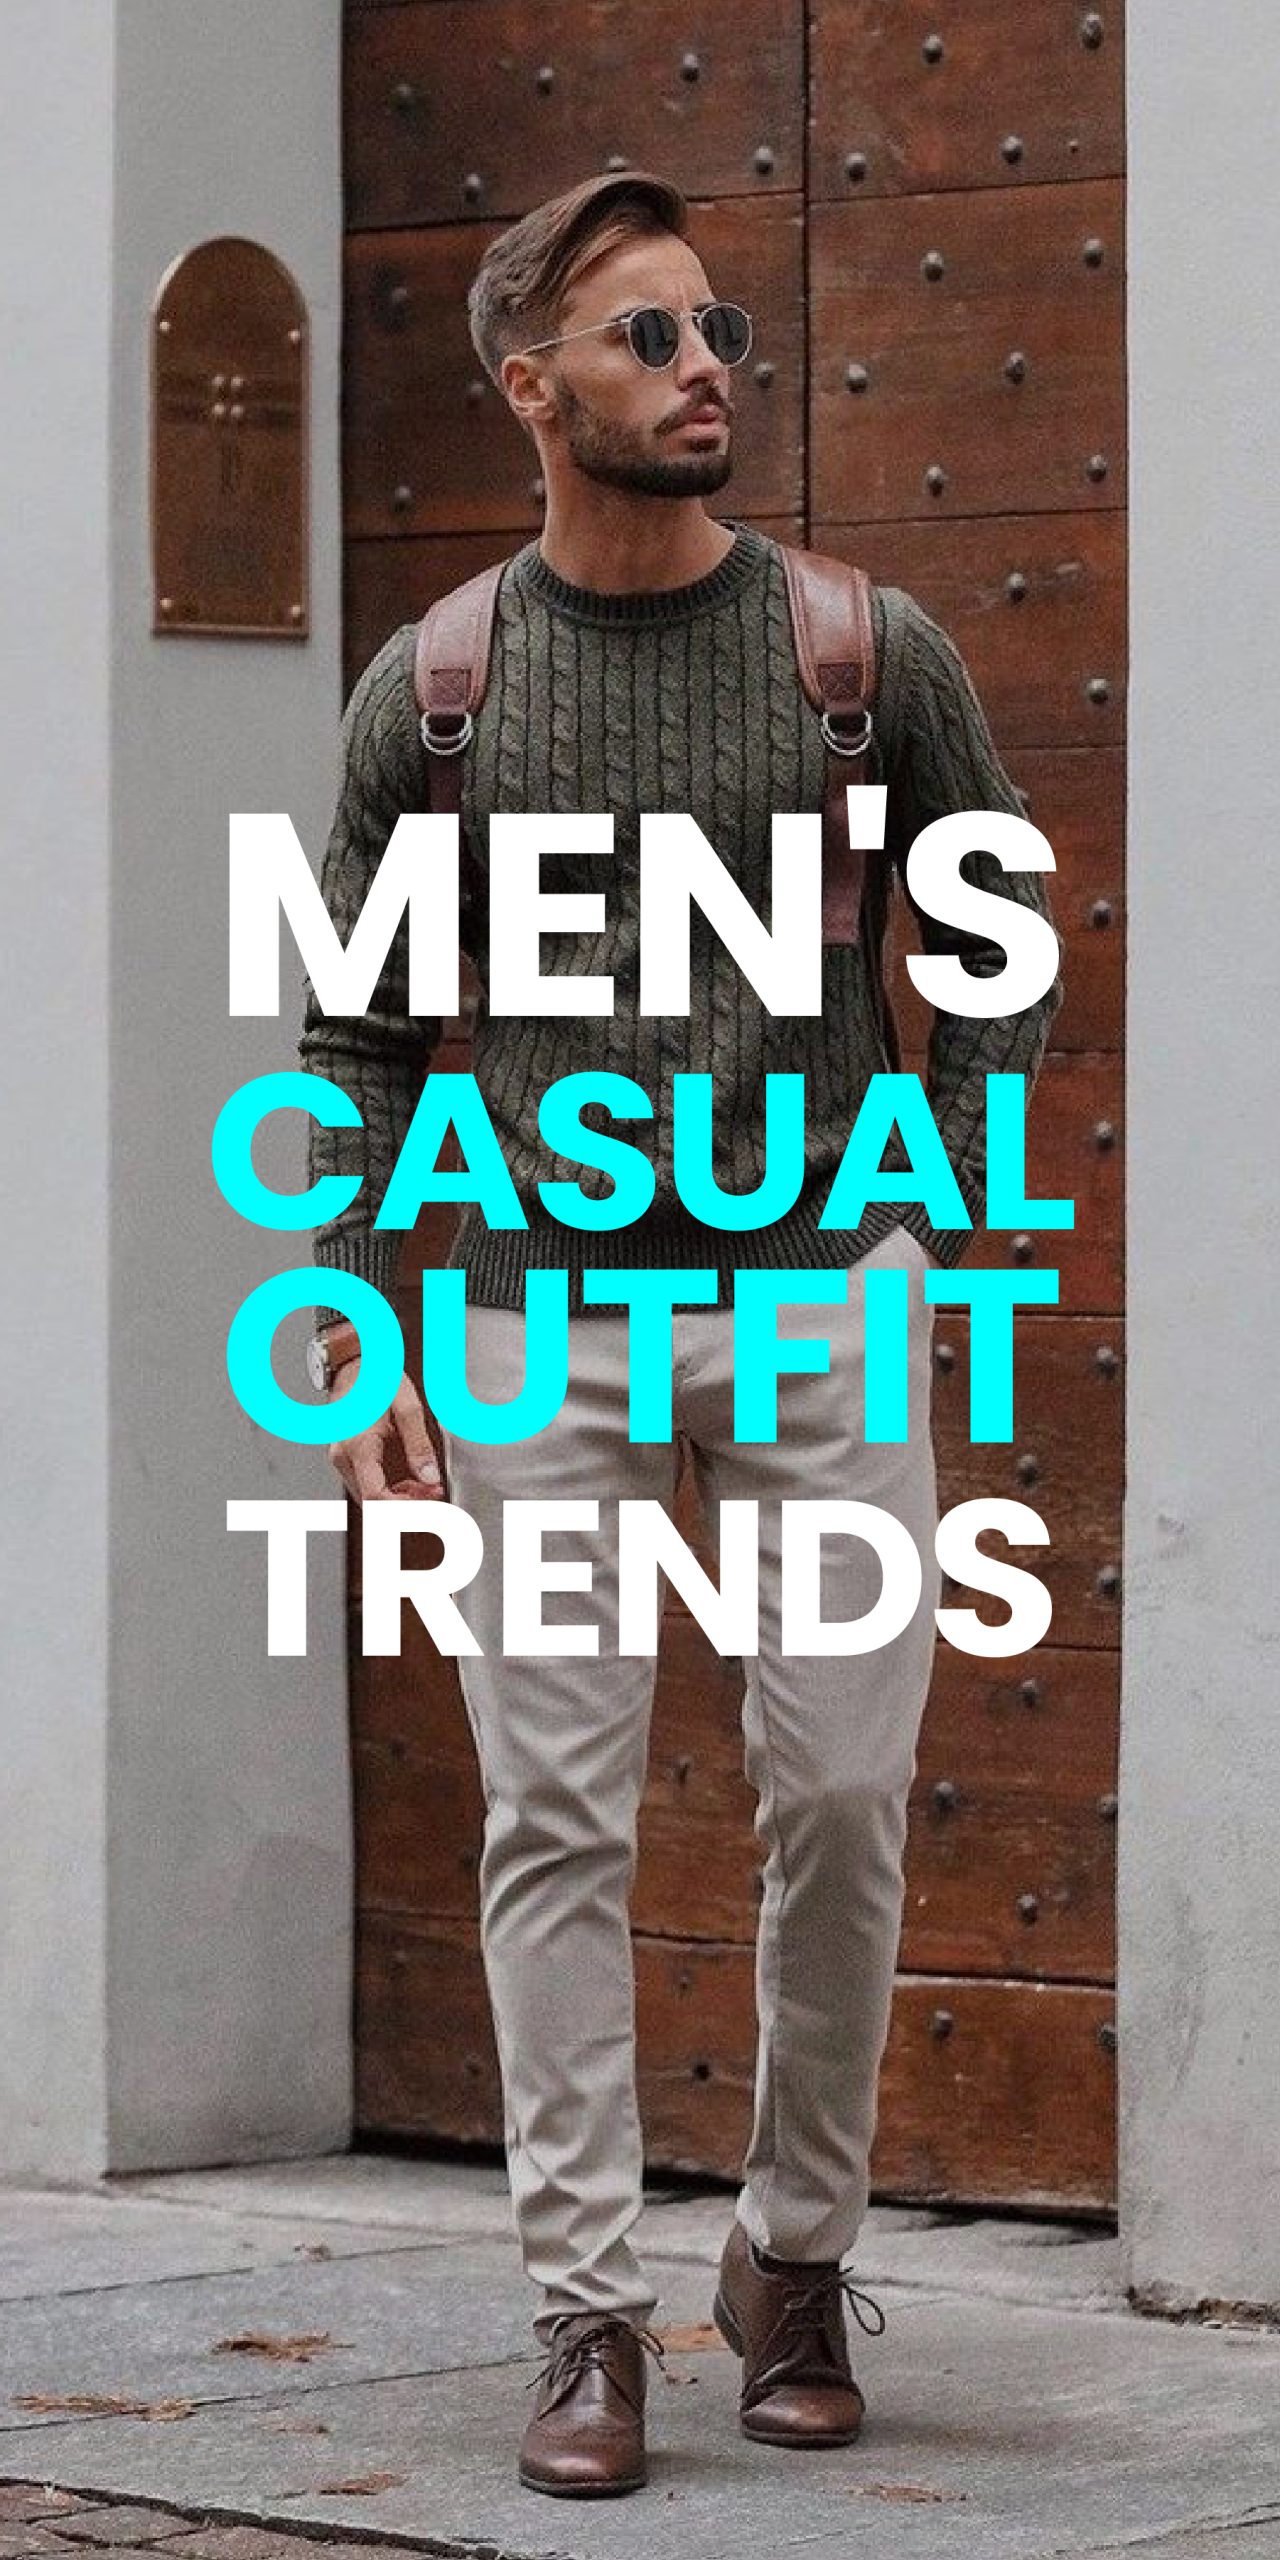 MEN’S CASUAL OUTFIT TRENDS